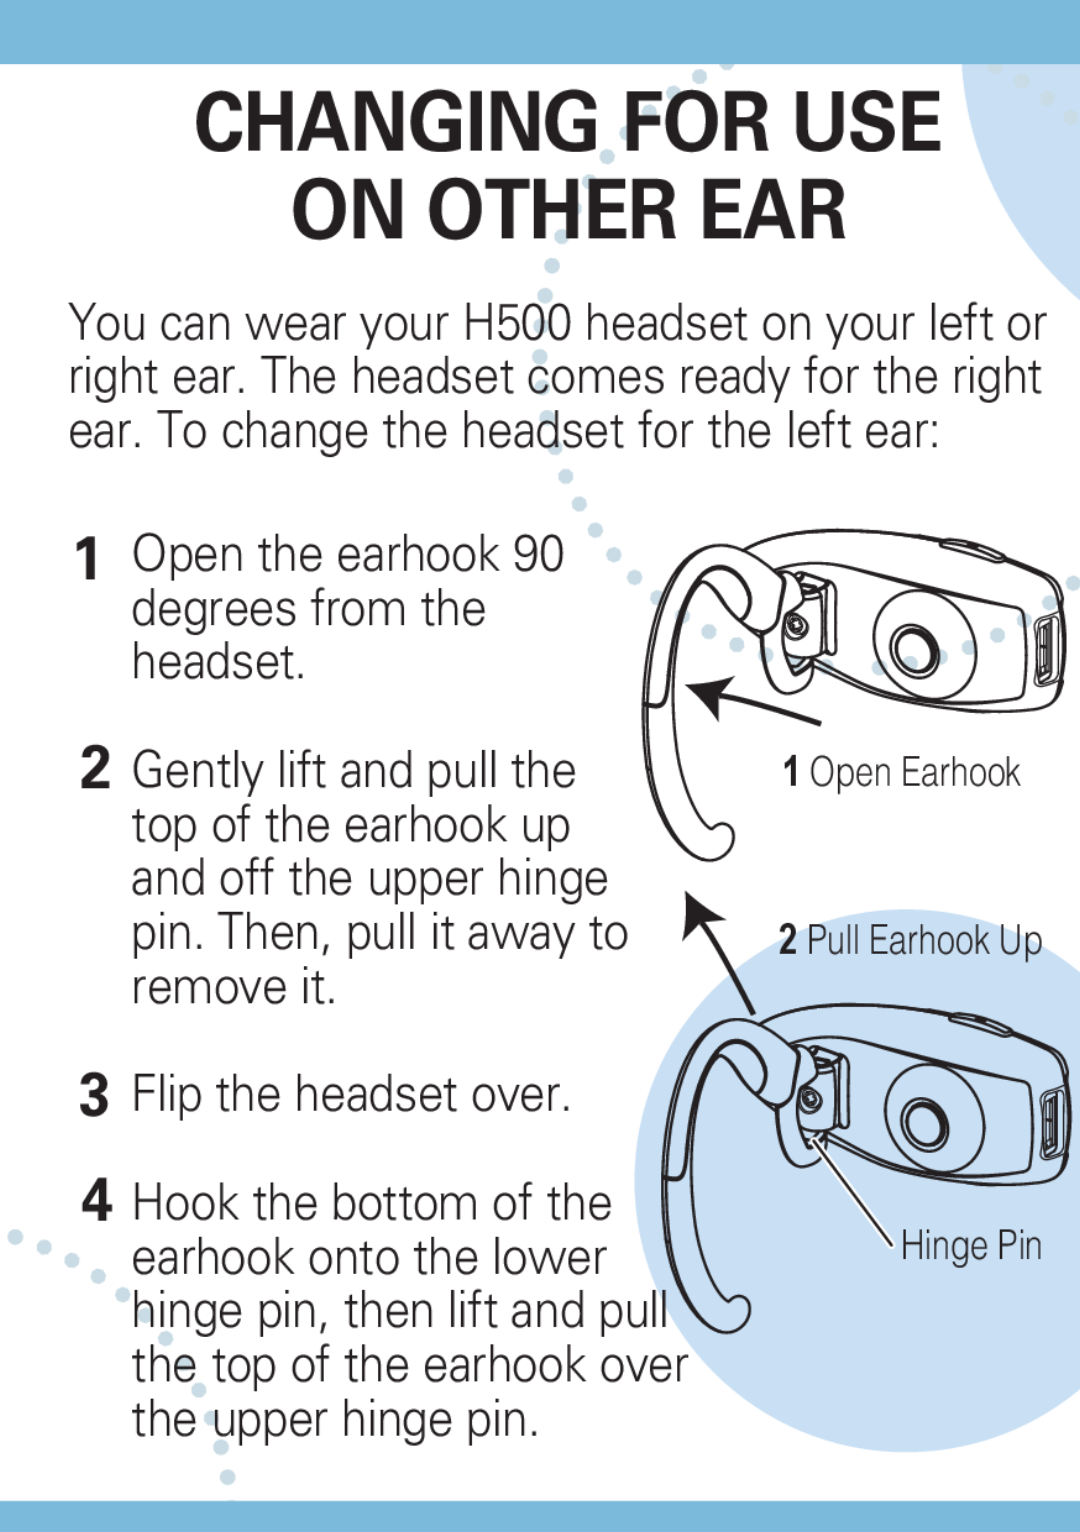 Motorola H500 manual Changing For Use On Other Ear, 1Open the earhook 90 degrees from the headset, 3Flip the headset over 